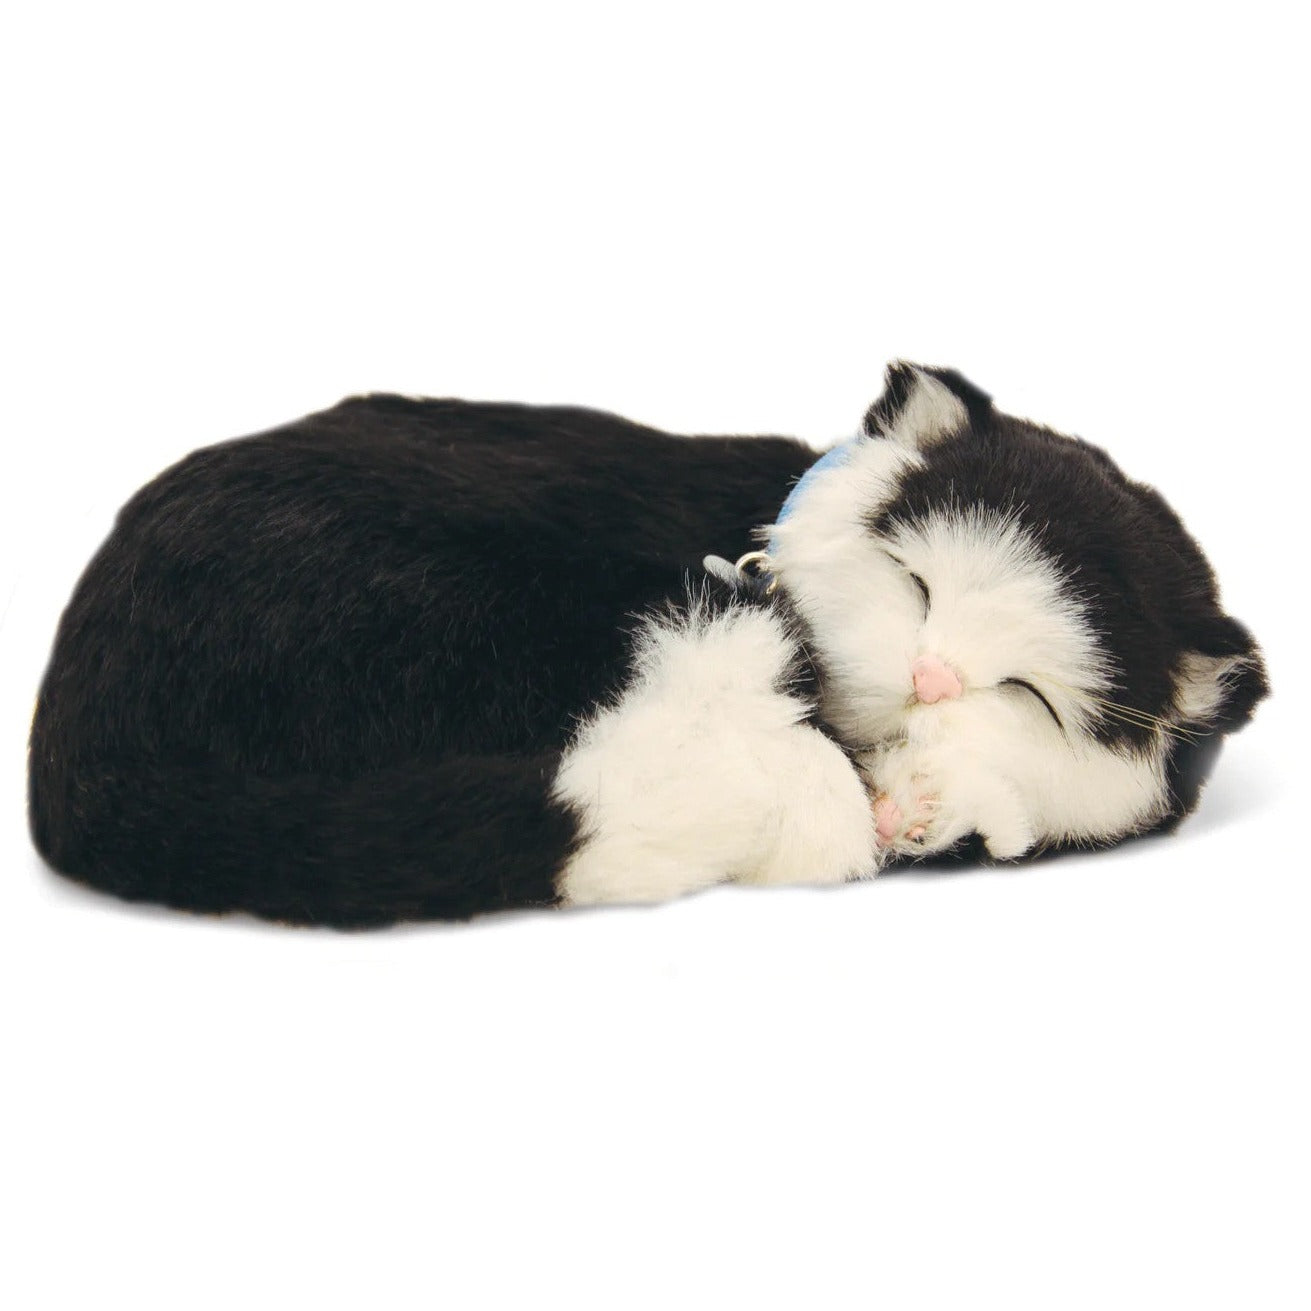 Realistic black and white kitten toy asleep